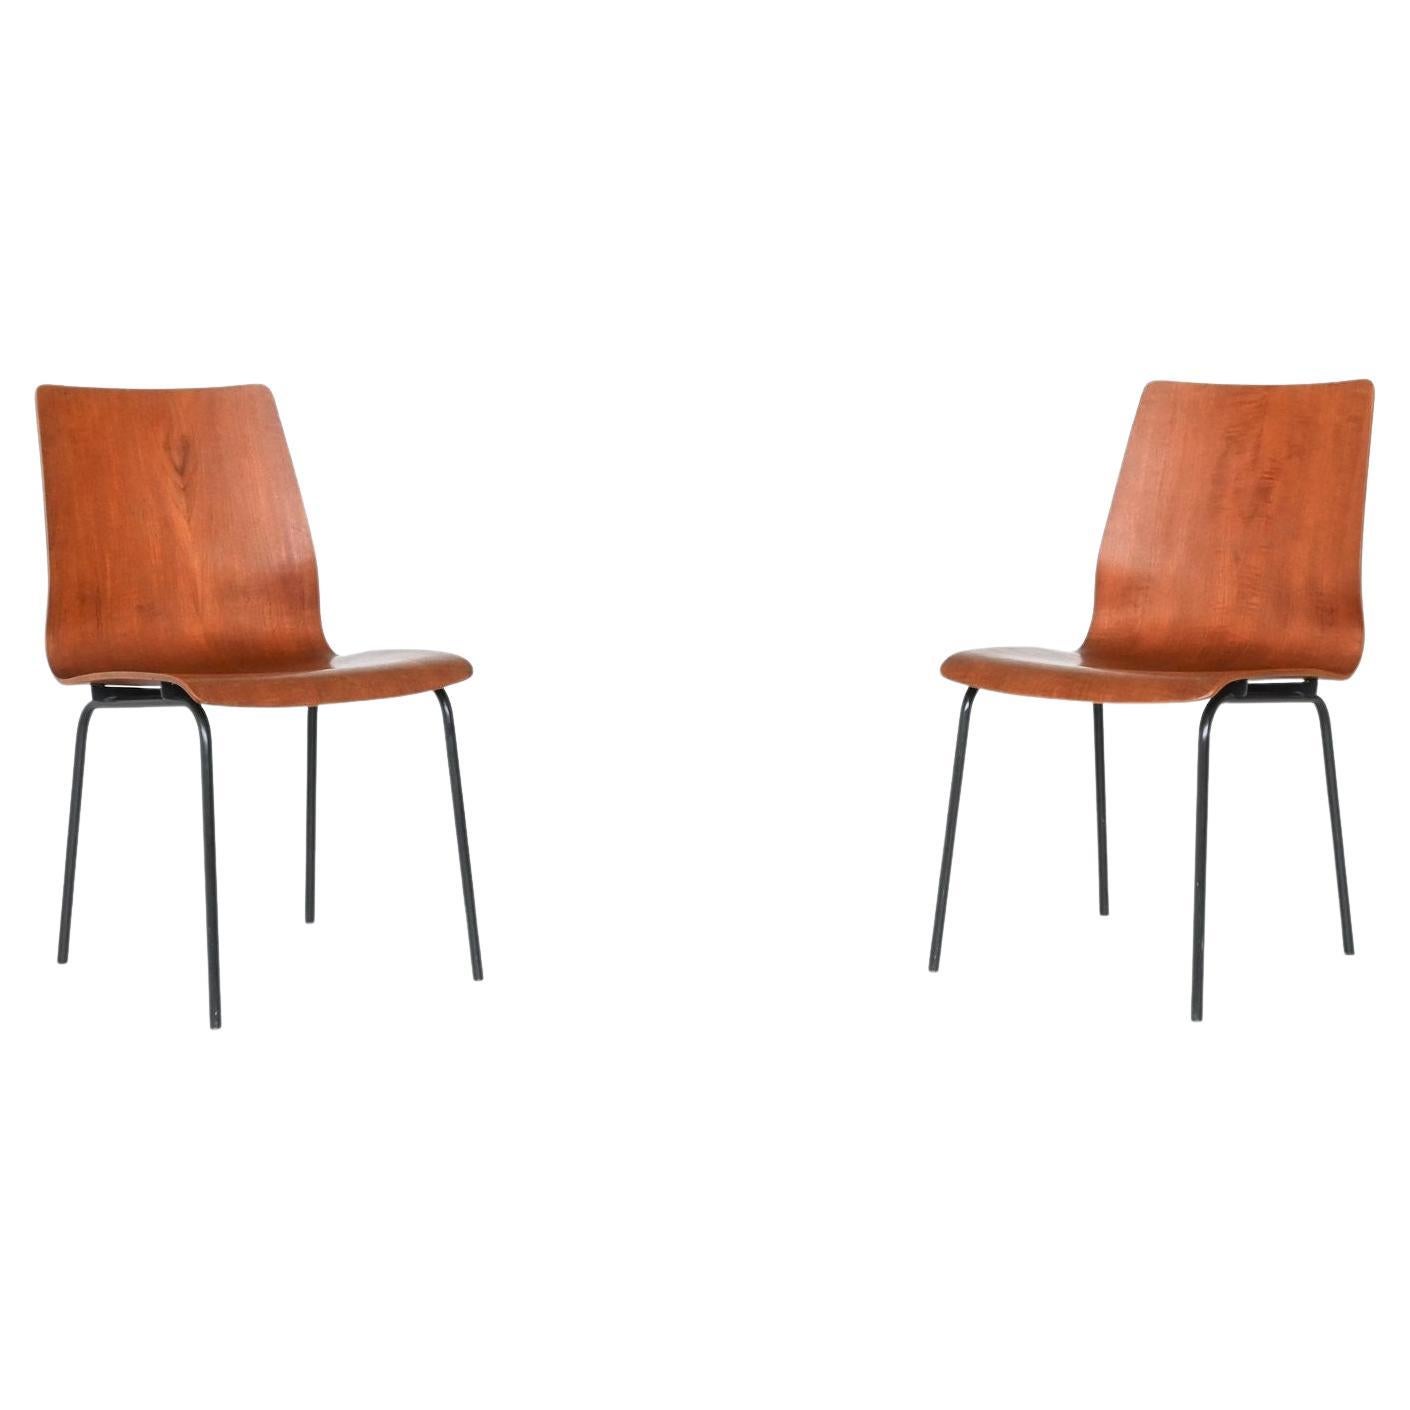 Friso Kramer Euroika Series Chairs Auping the Netherlands, 1963